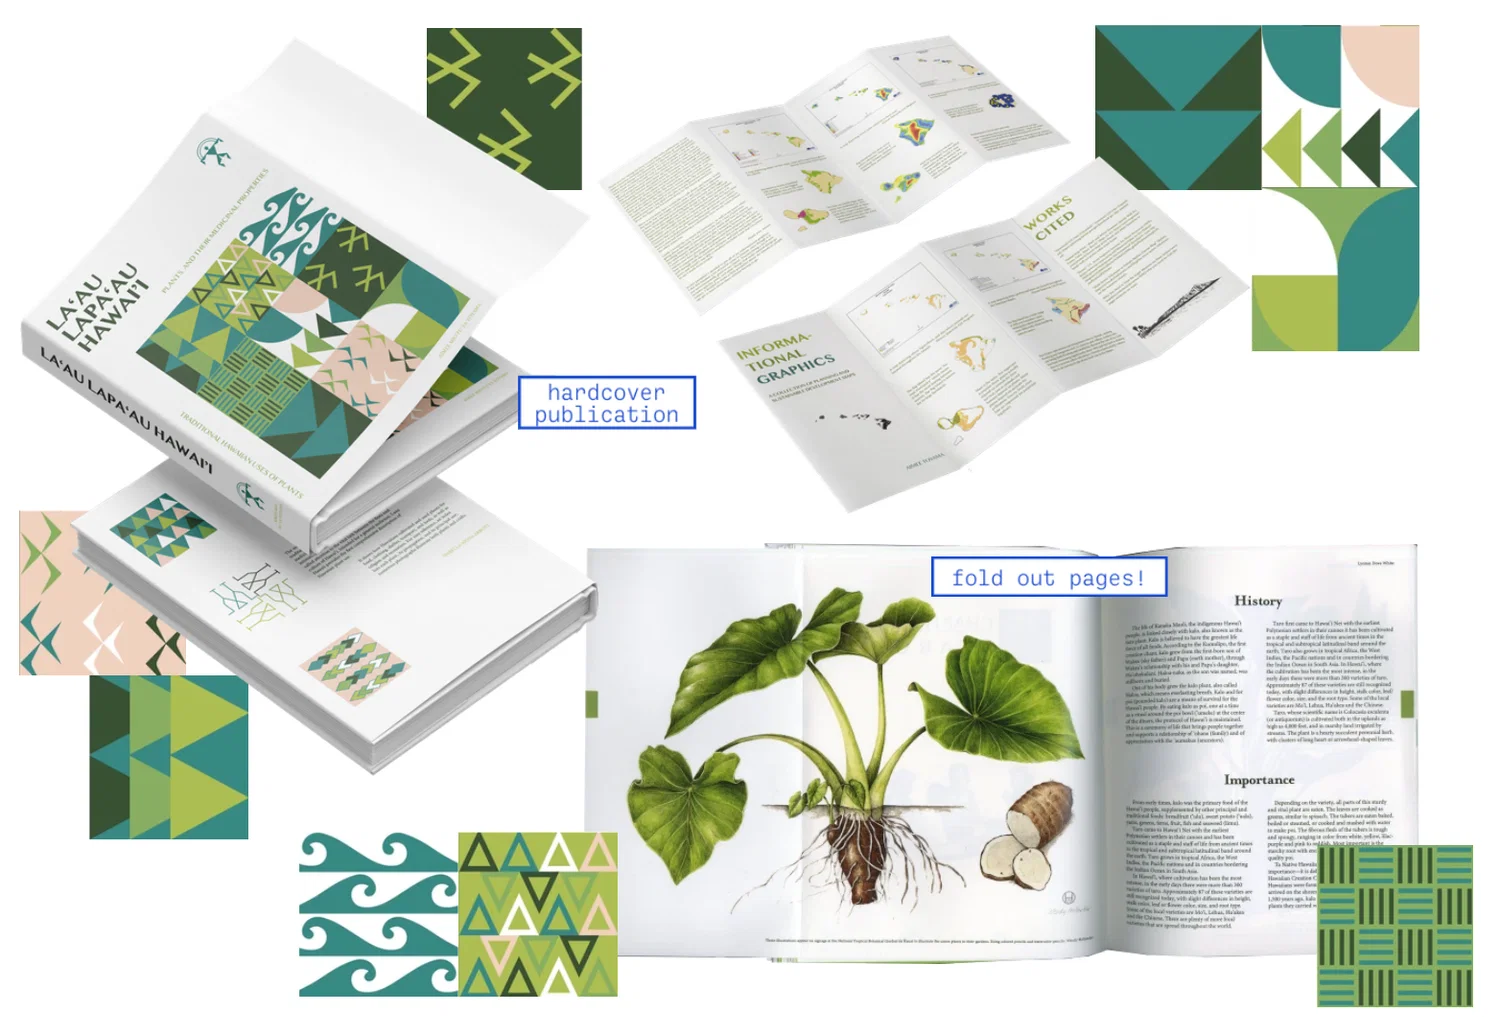 Components: Hardcover book and brochure